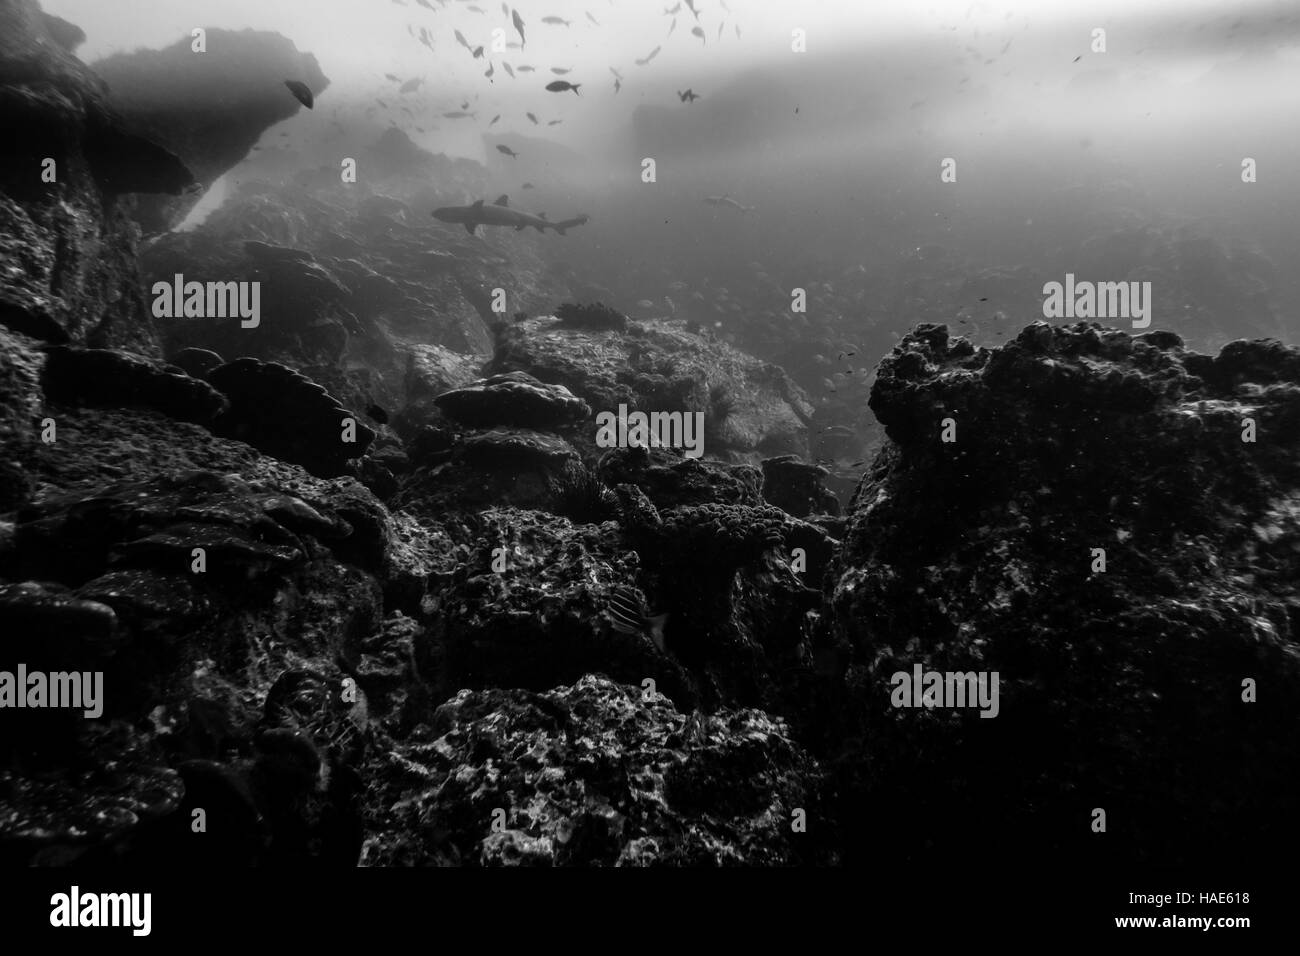 Coral reef background Black and White Stock Photos & Images - Alamy